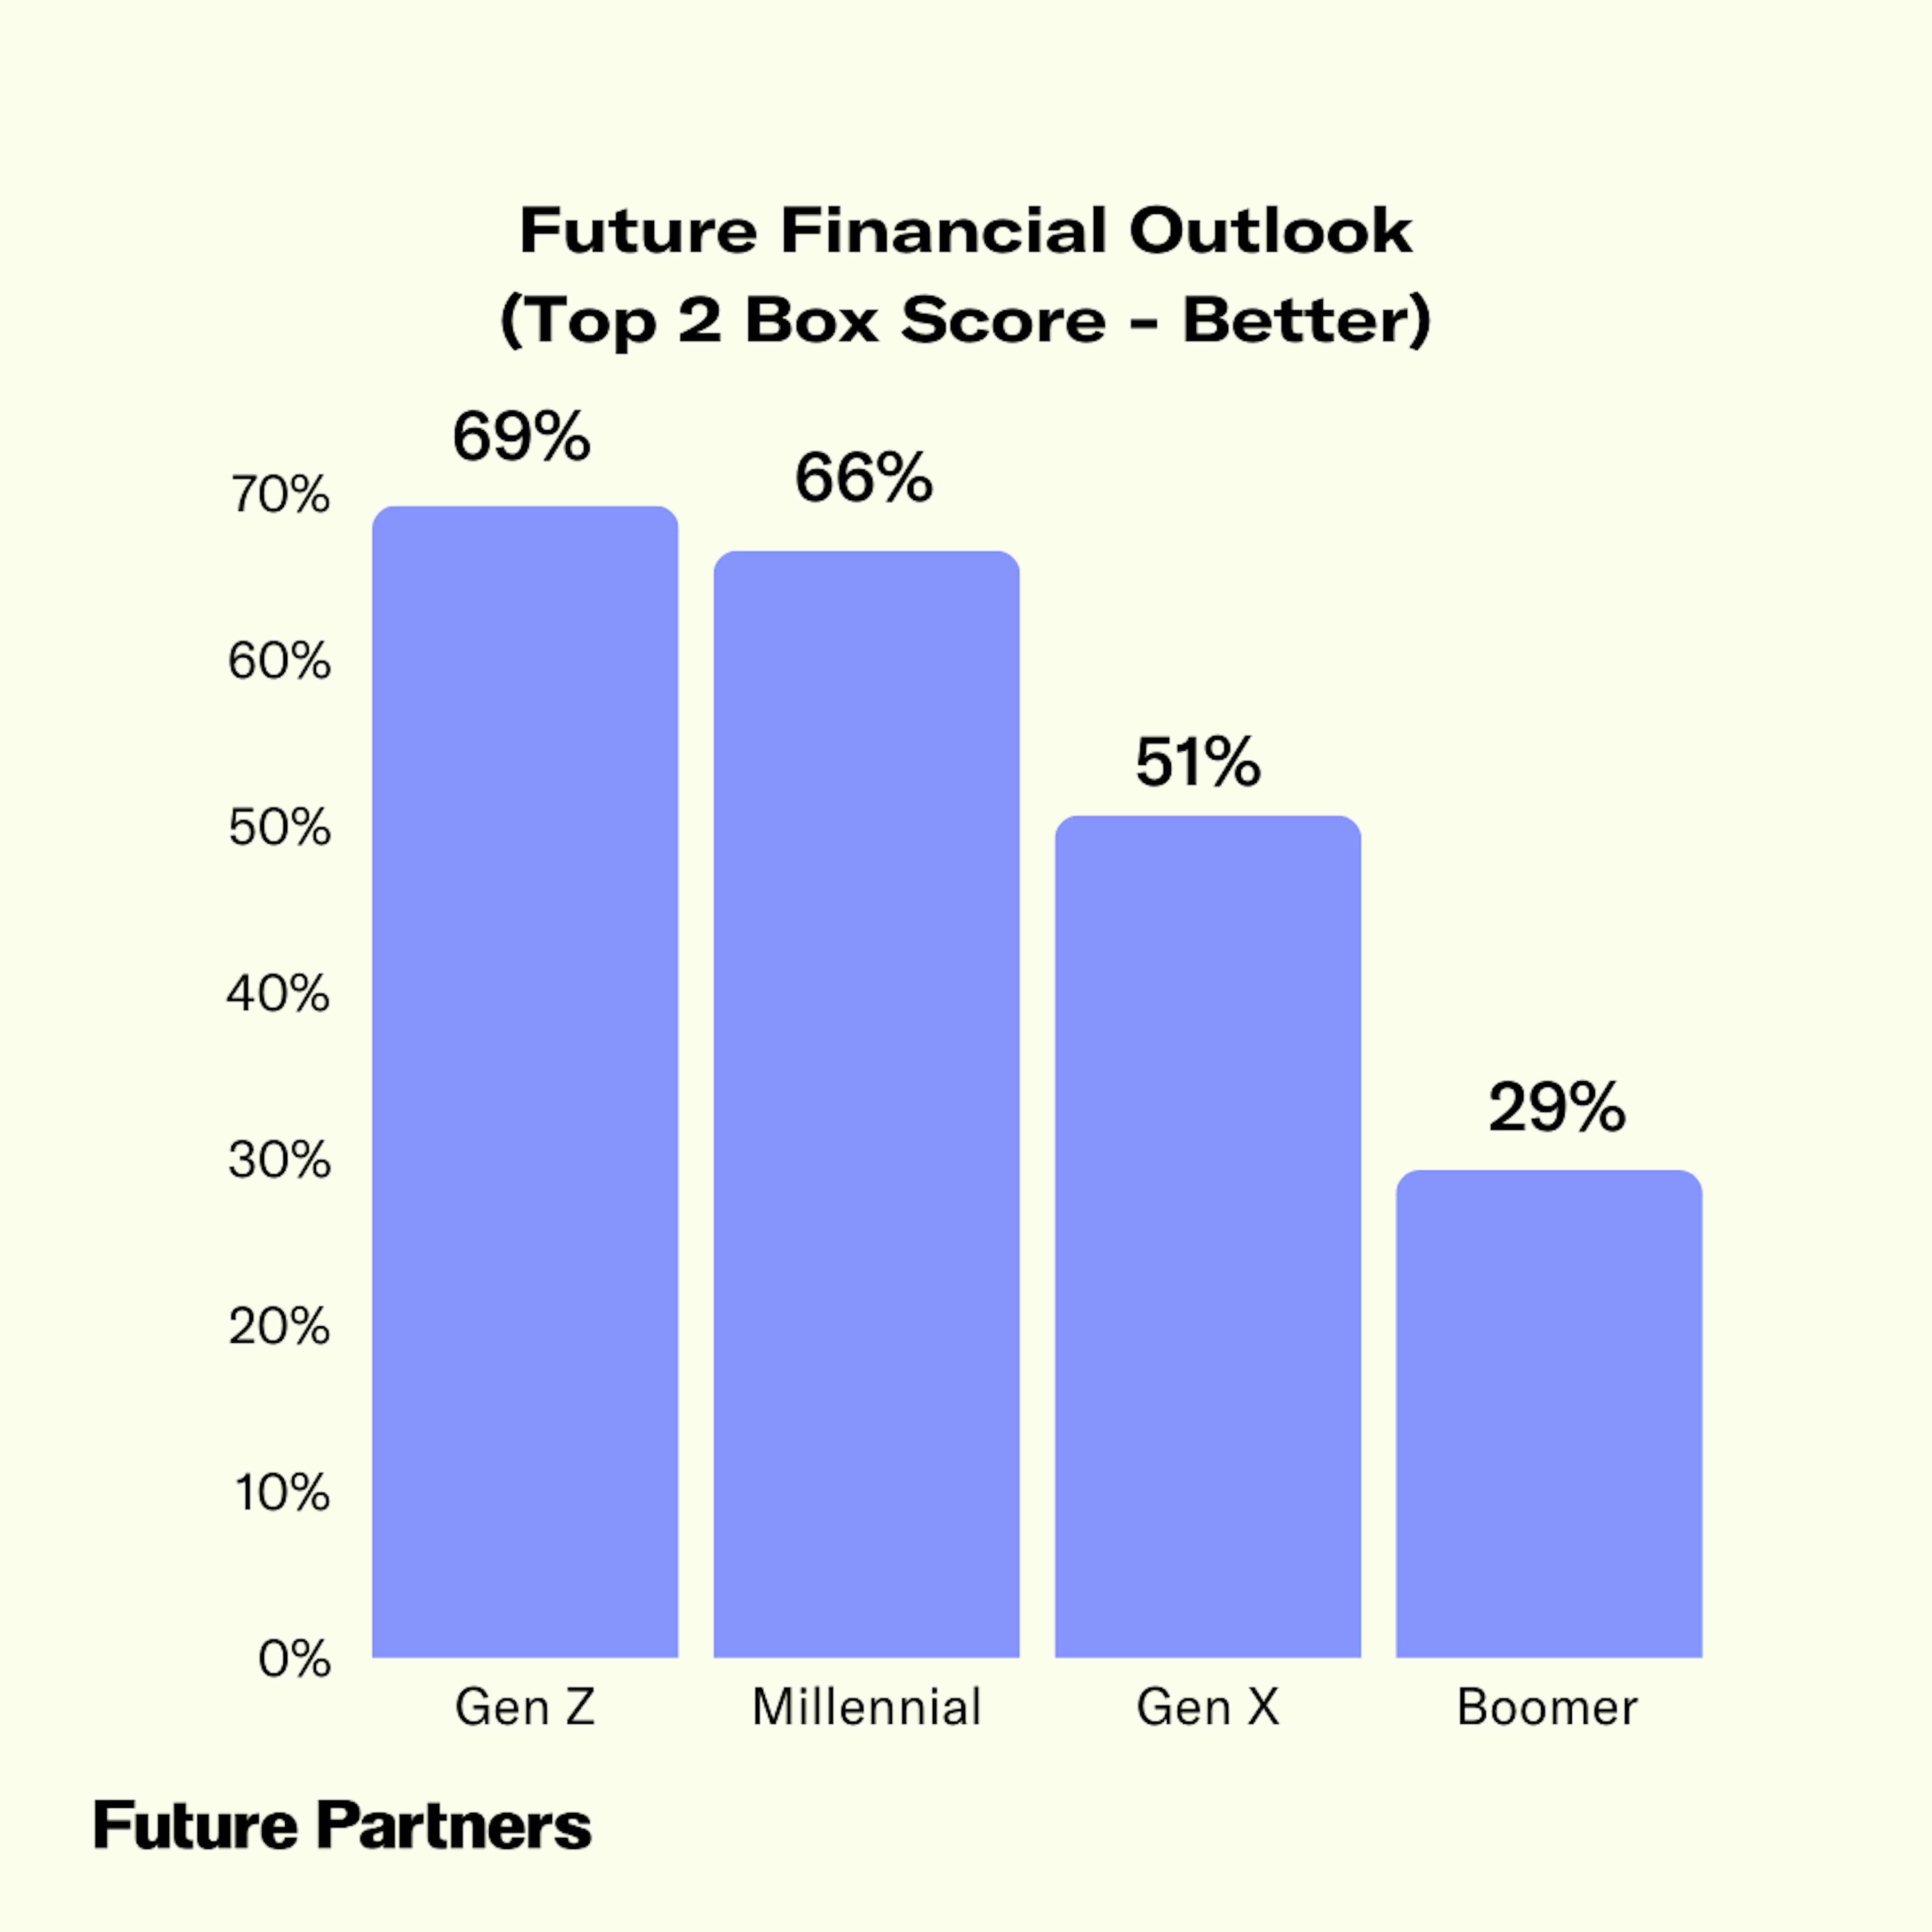 Gen Z are most optimistic about their financial future at 69%, Millennials follow at 66%, and Boomers bring up the rear at 29%.